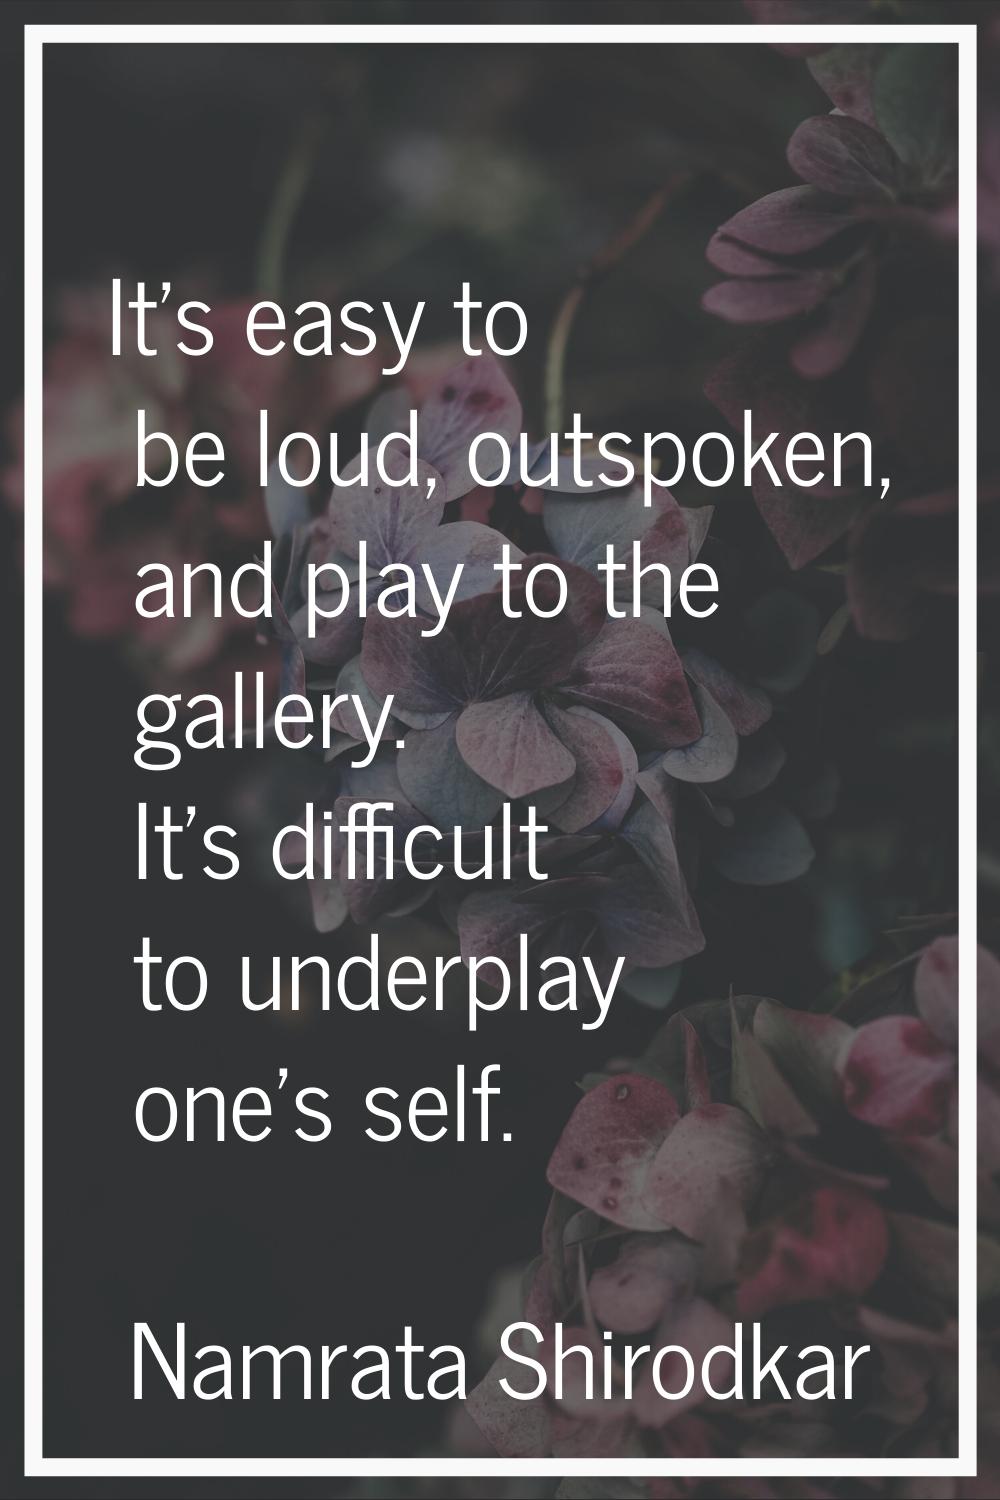 It's easy to be loud, outspoken, and play to the gallery. It's difficult to underplay one's self.